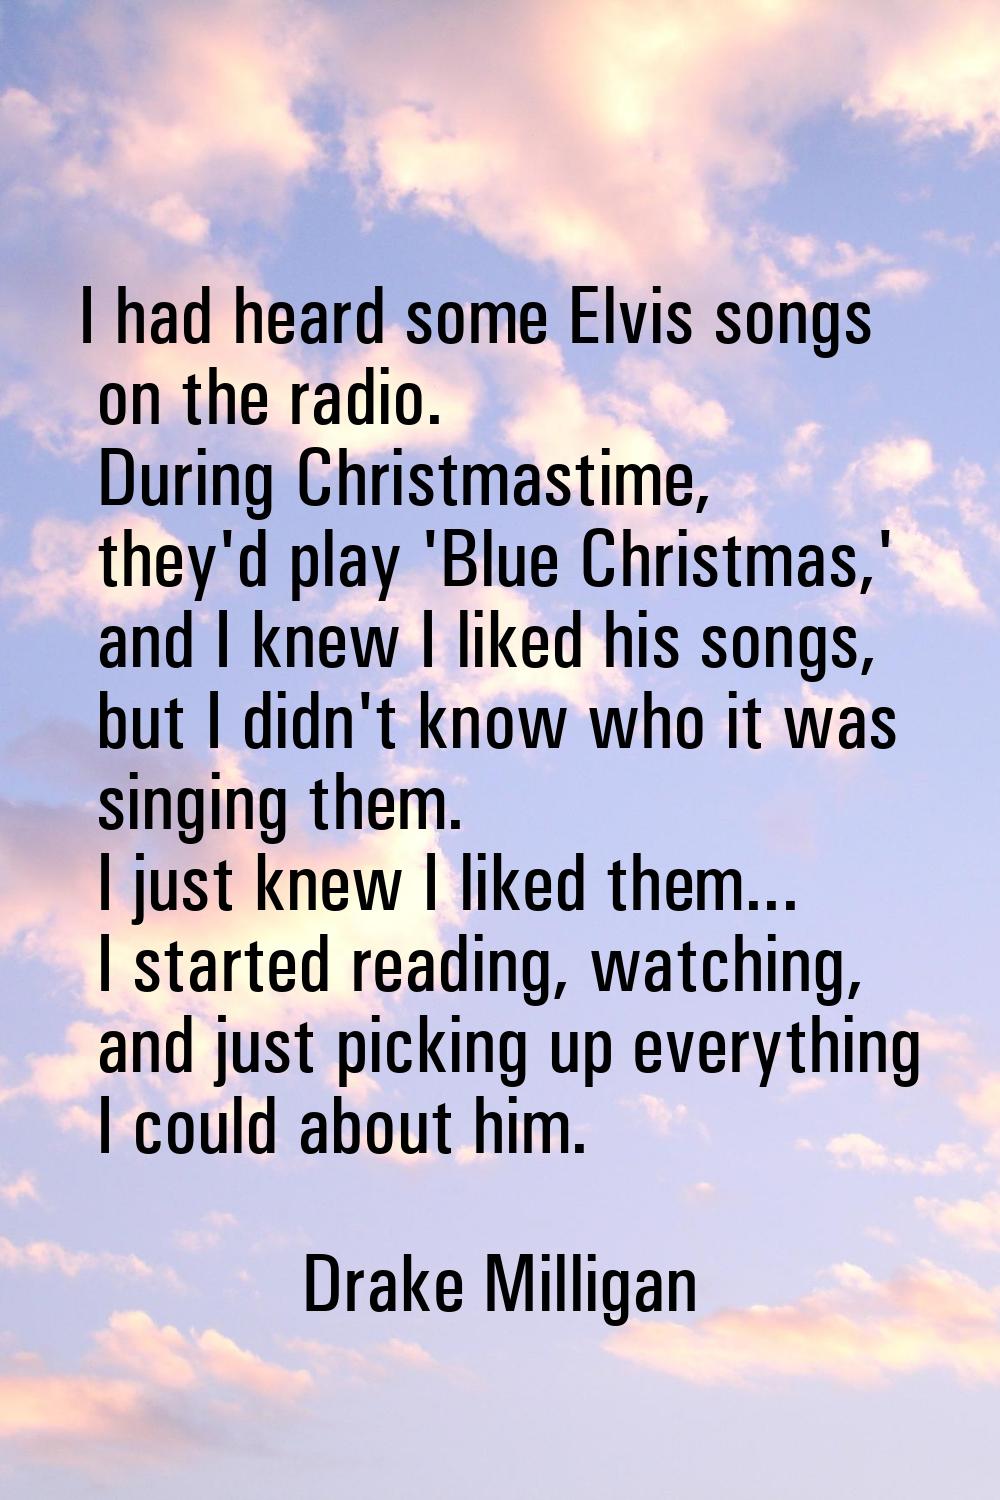 I had heard some Elvis songs on the radio. During Christmastime, they'd play 'Blue Christmas,' and 